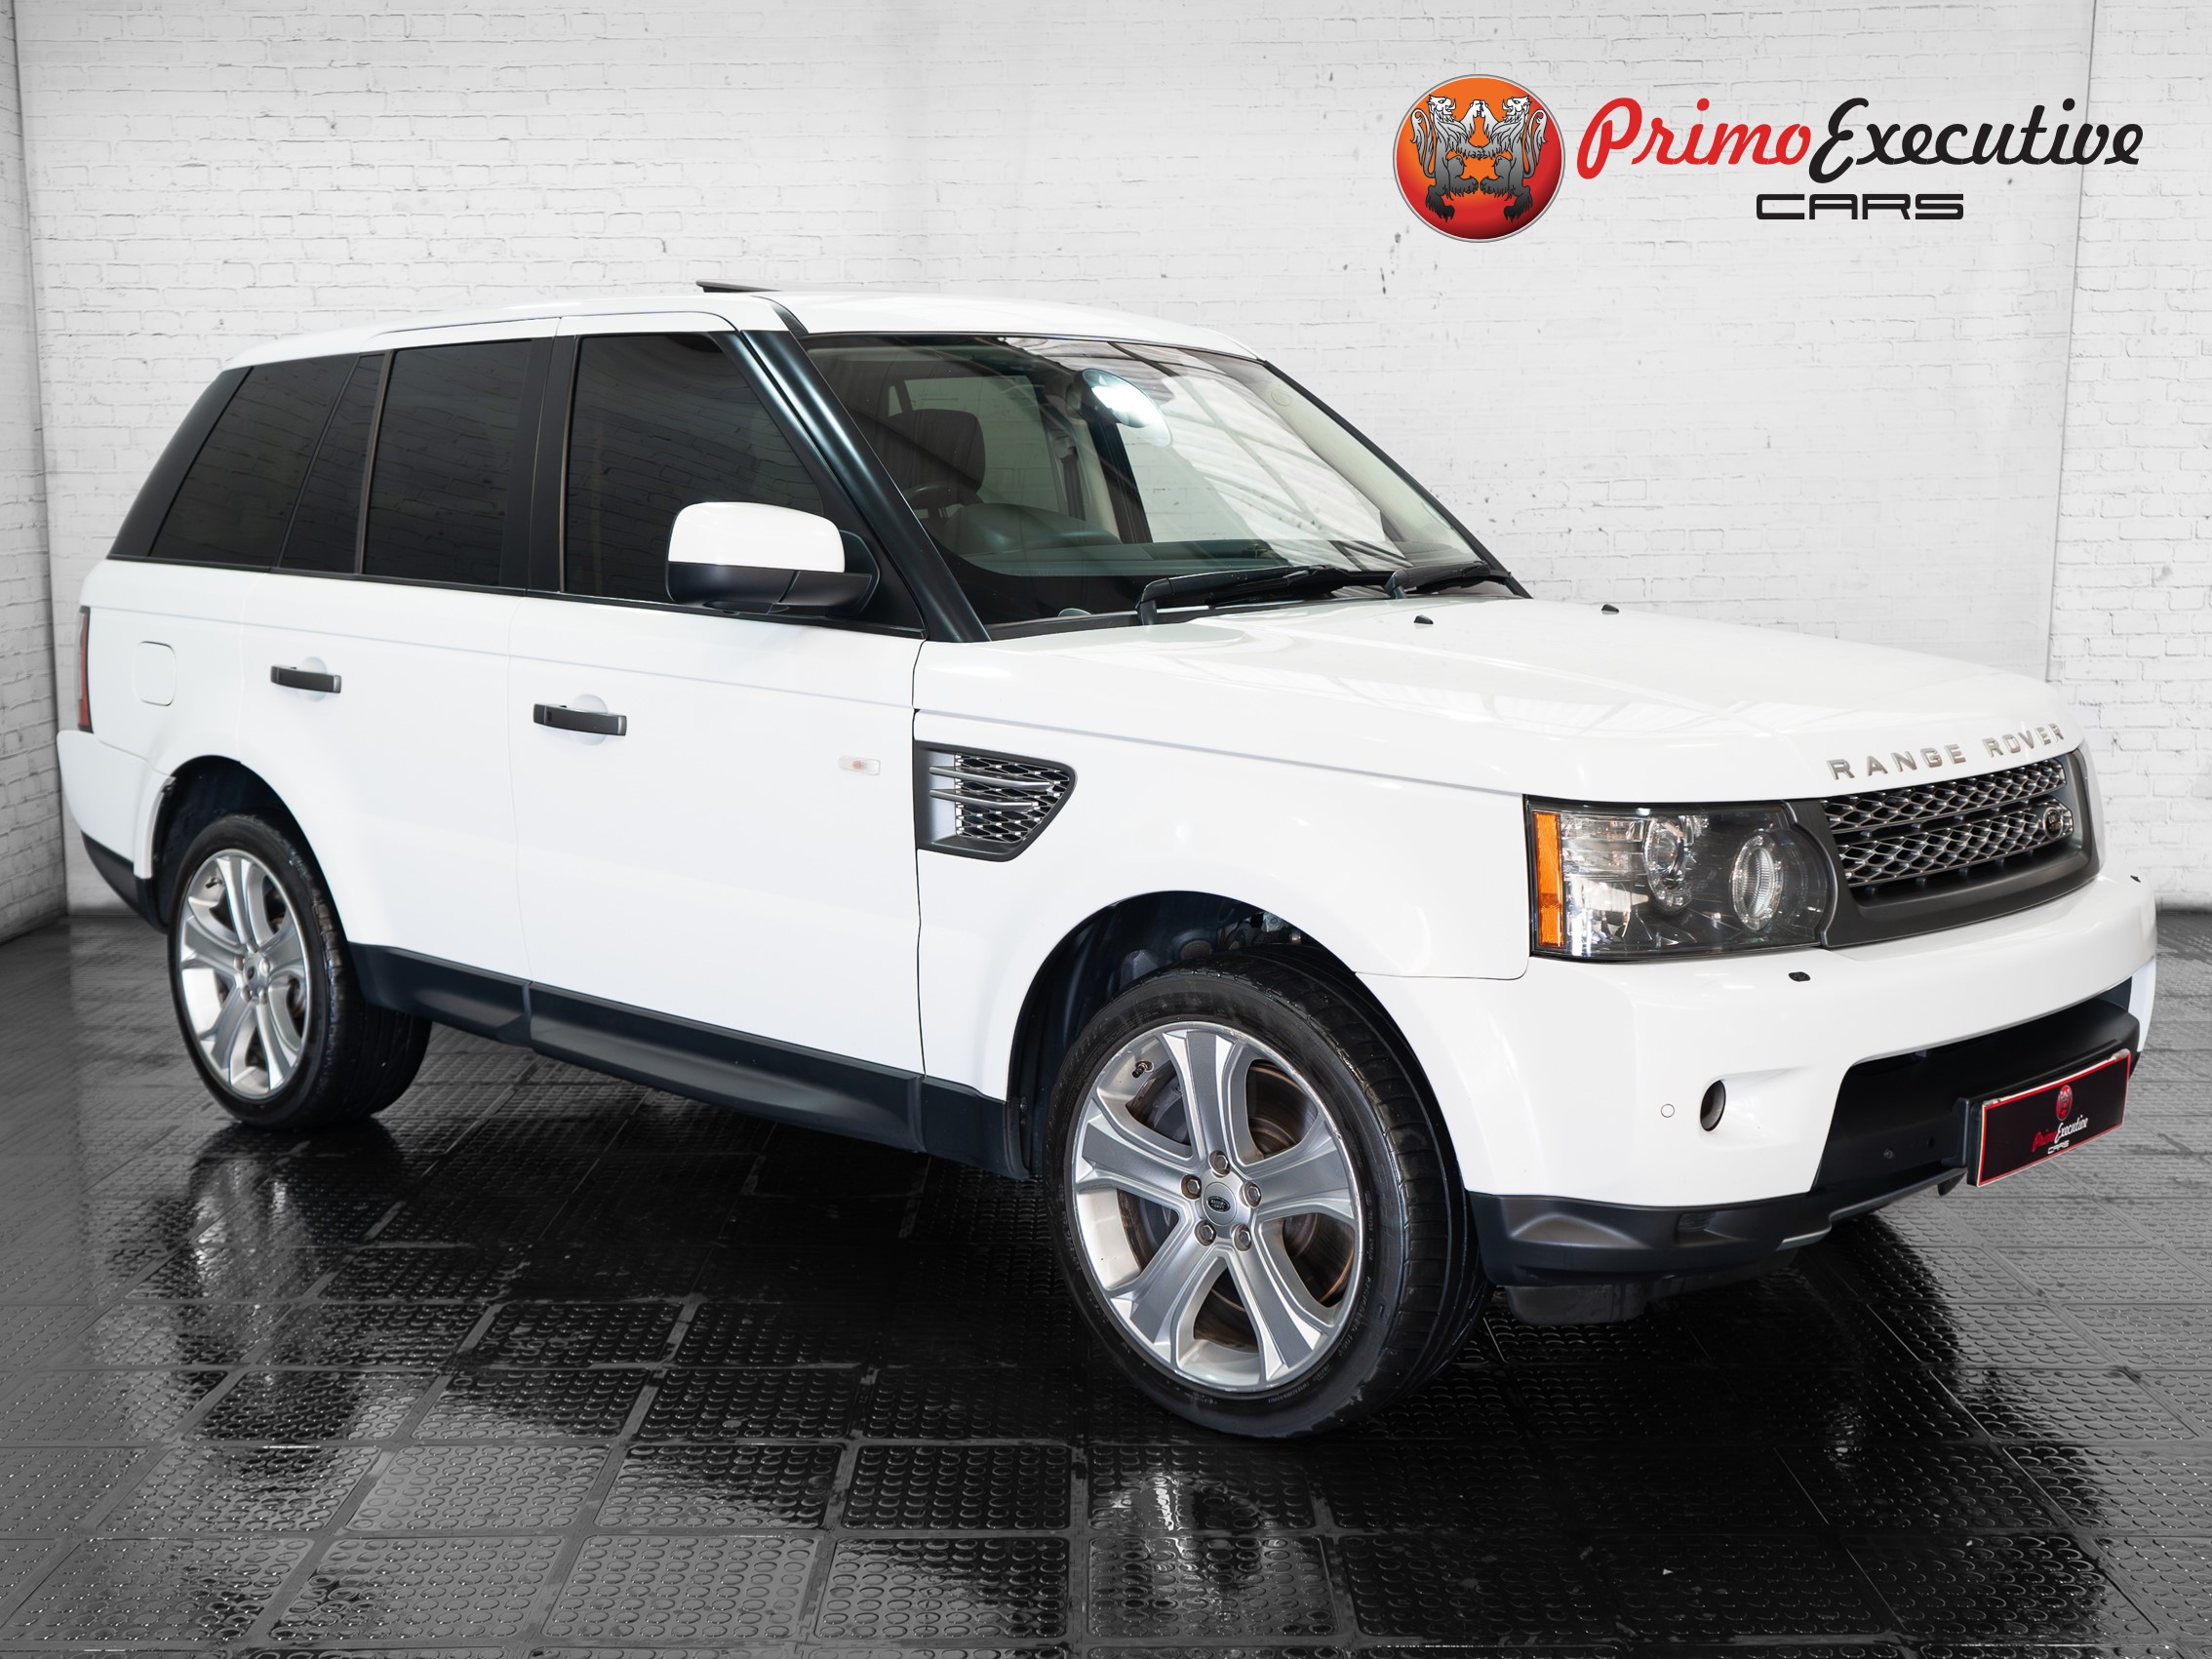 2011 Land Rover Range Rover  for sale - 510591